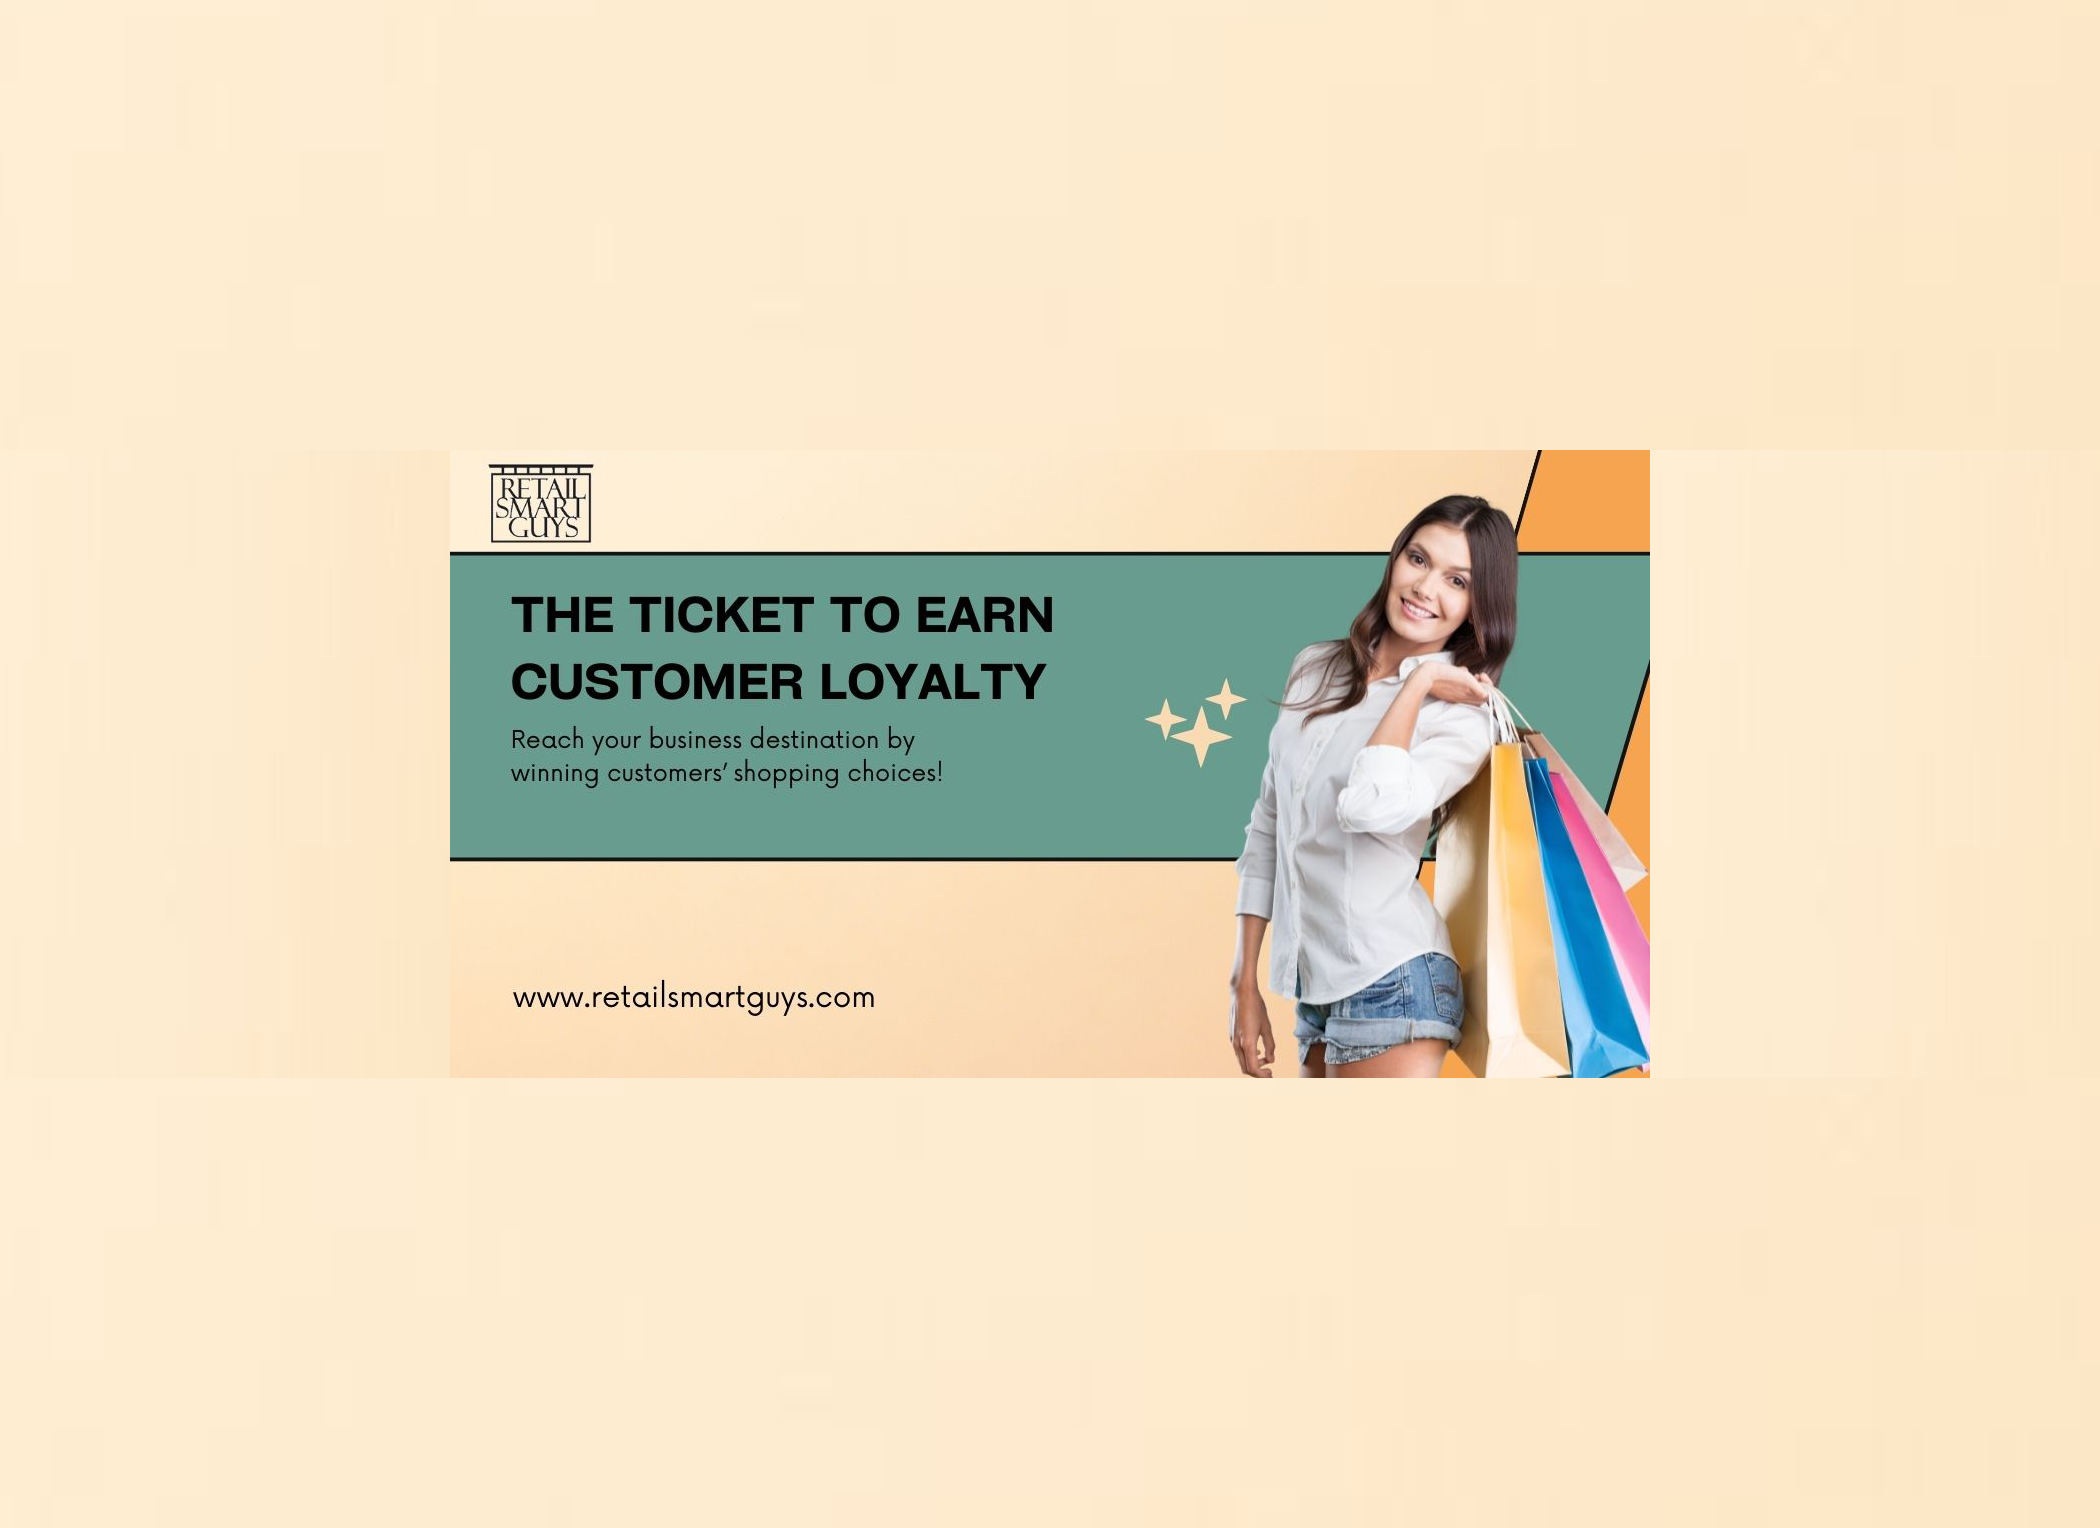 The Ticket to Earn Customer Loyalty